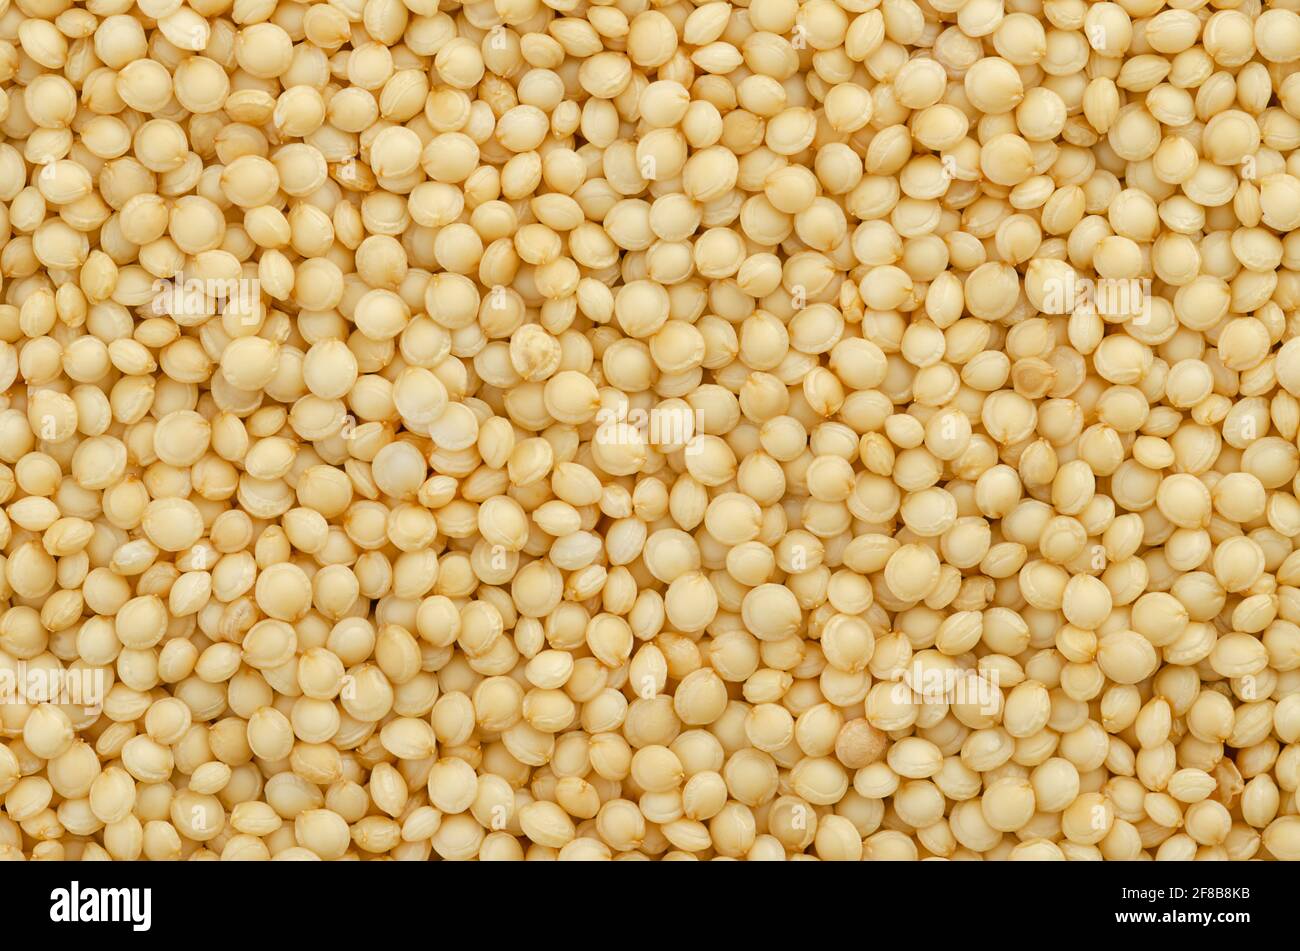 Amaranth grain, close-up. Amaranthus seeds, a gluten free pseudocereal similar to quinoa, staple food and a source of protein of the Aztecs. Stock Photo